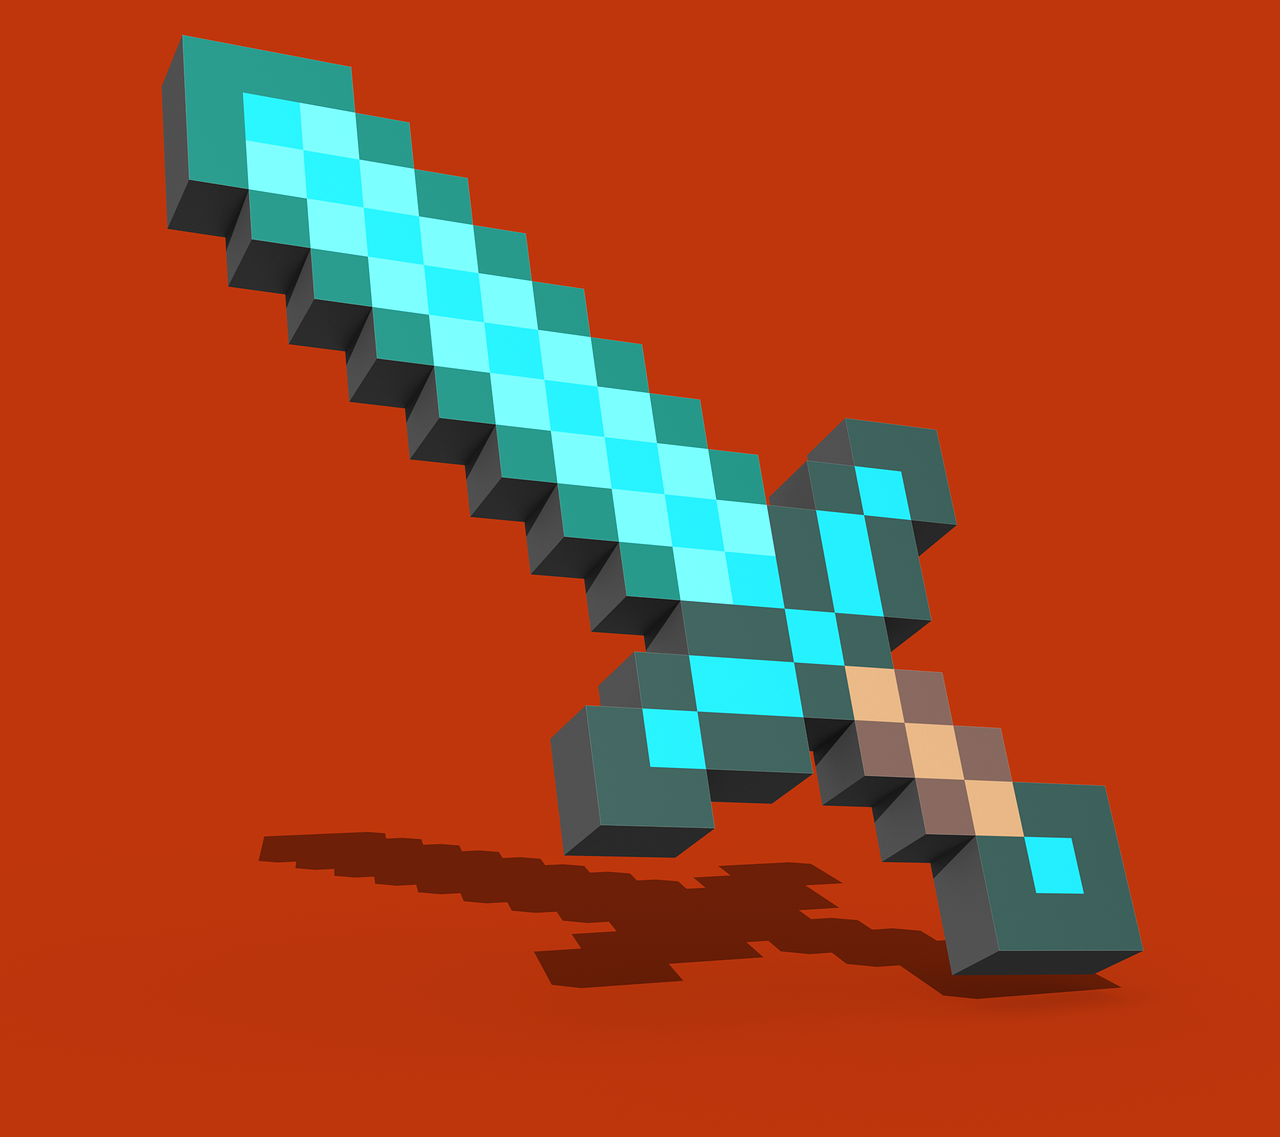 Wallpaper, minecraft, sword, free picture, free photo image